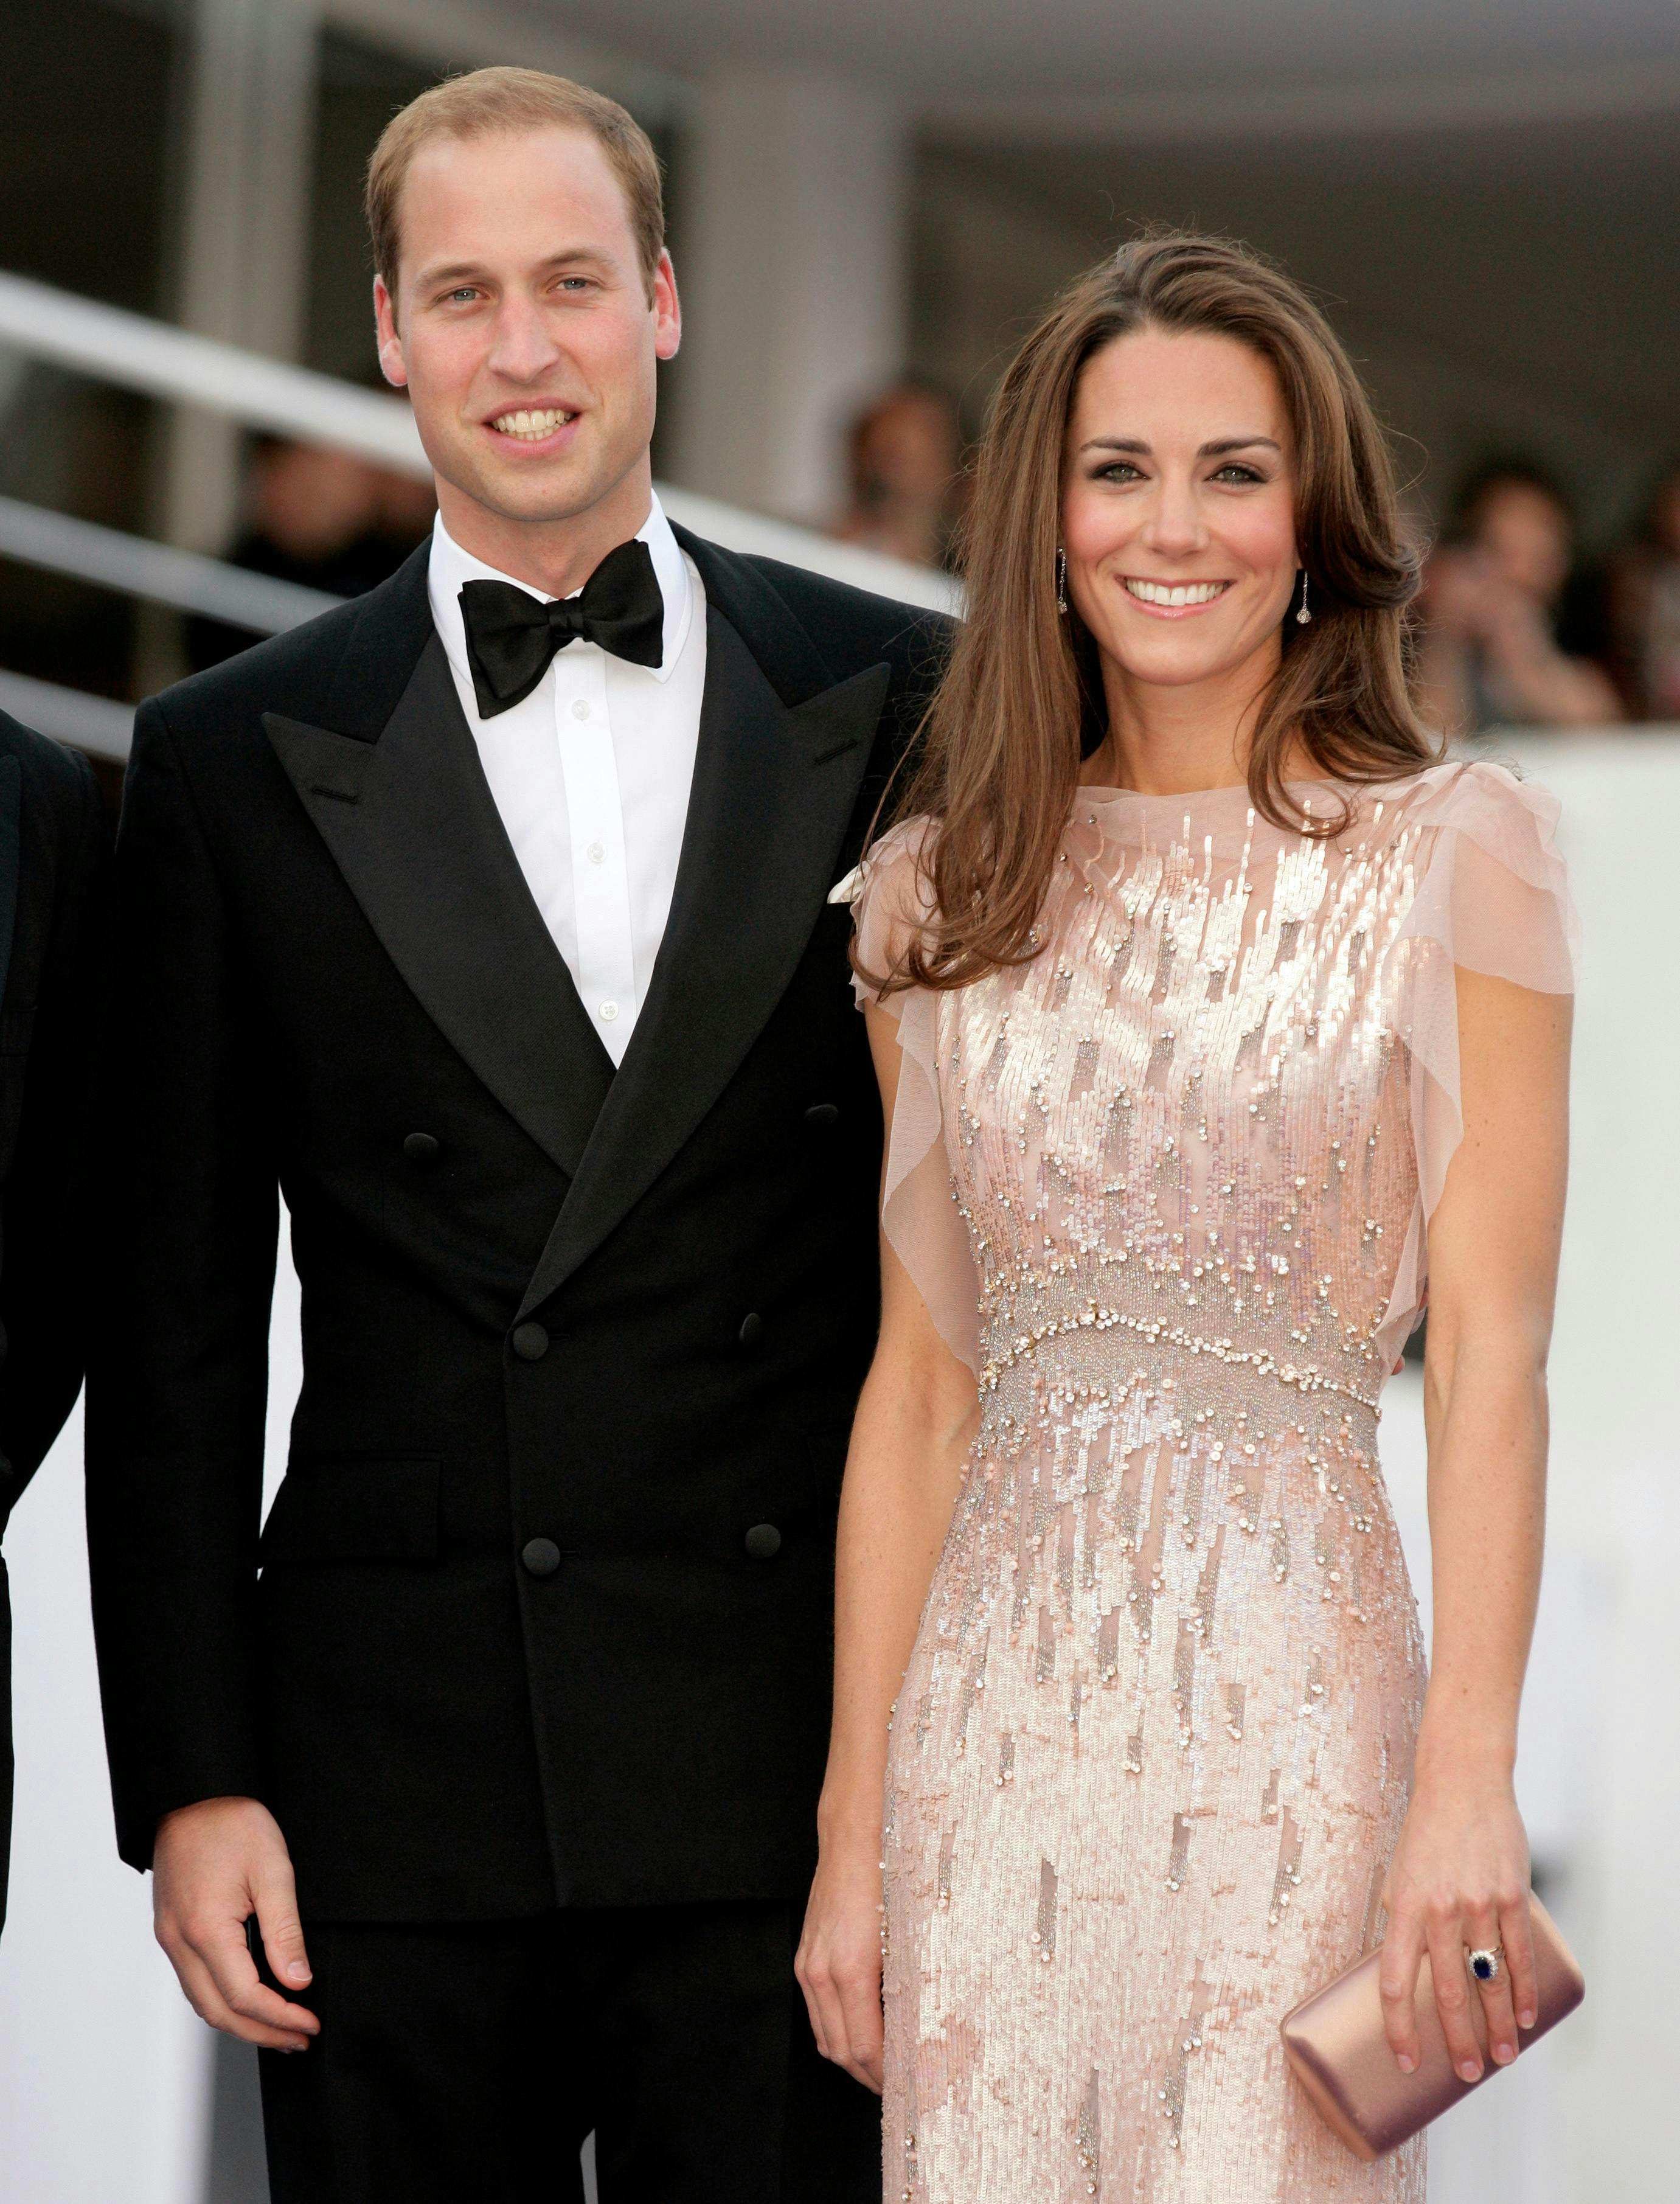 ball gown black tie british royalty catherine middleton celebrities duchess of cambridge duke of cambridge evening wear gown jenny packham kate middleton pink dress prince william royalty sequins smiling two people topics topix bestof toppics toppix london england formal wear fashion dress suit evening dress adult male man person tuxedo